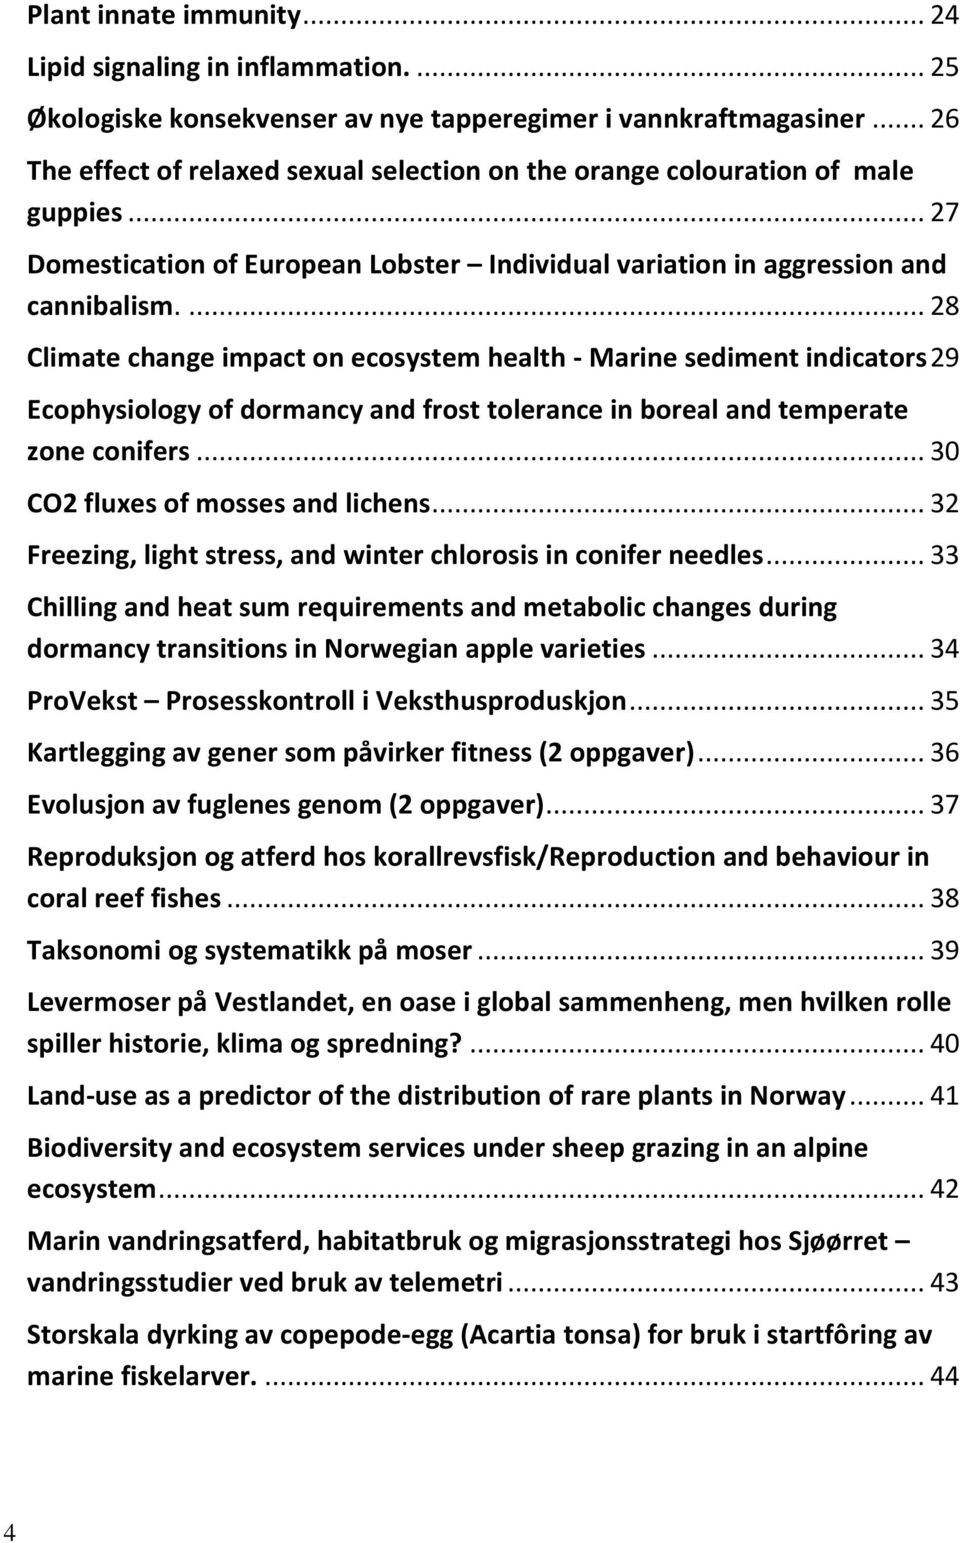 ... 28 Climate change impact on ecosystem health - Marine sediment indicators 29 Ecophysiology of dormancy and frost tolerance in boreal and temperate zone conifers.